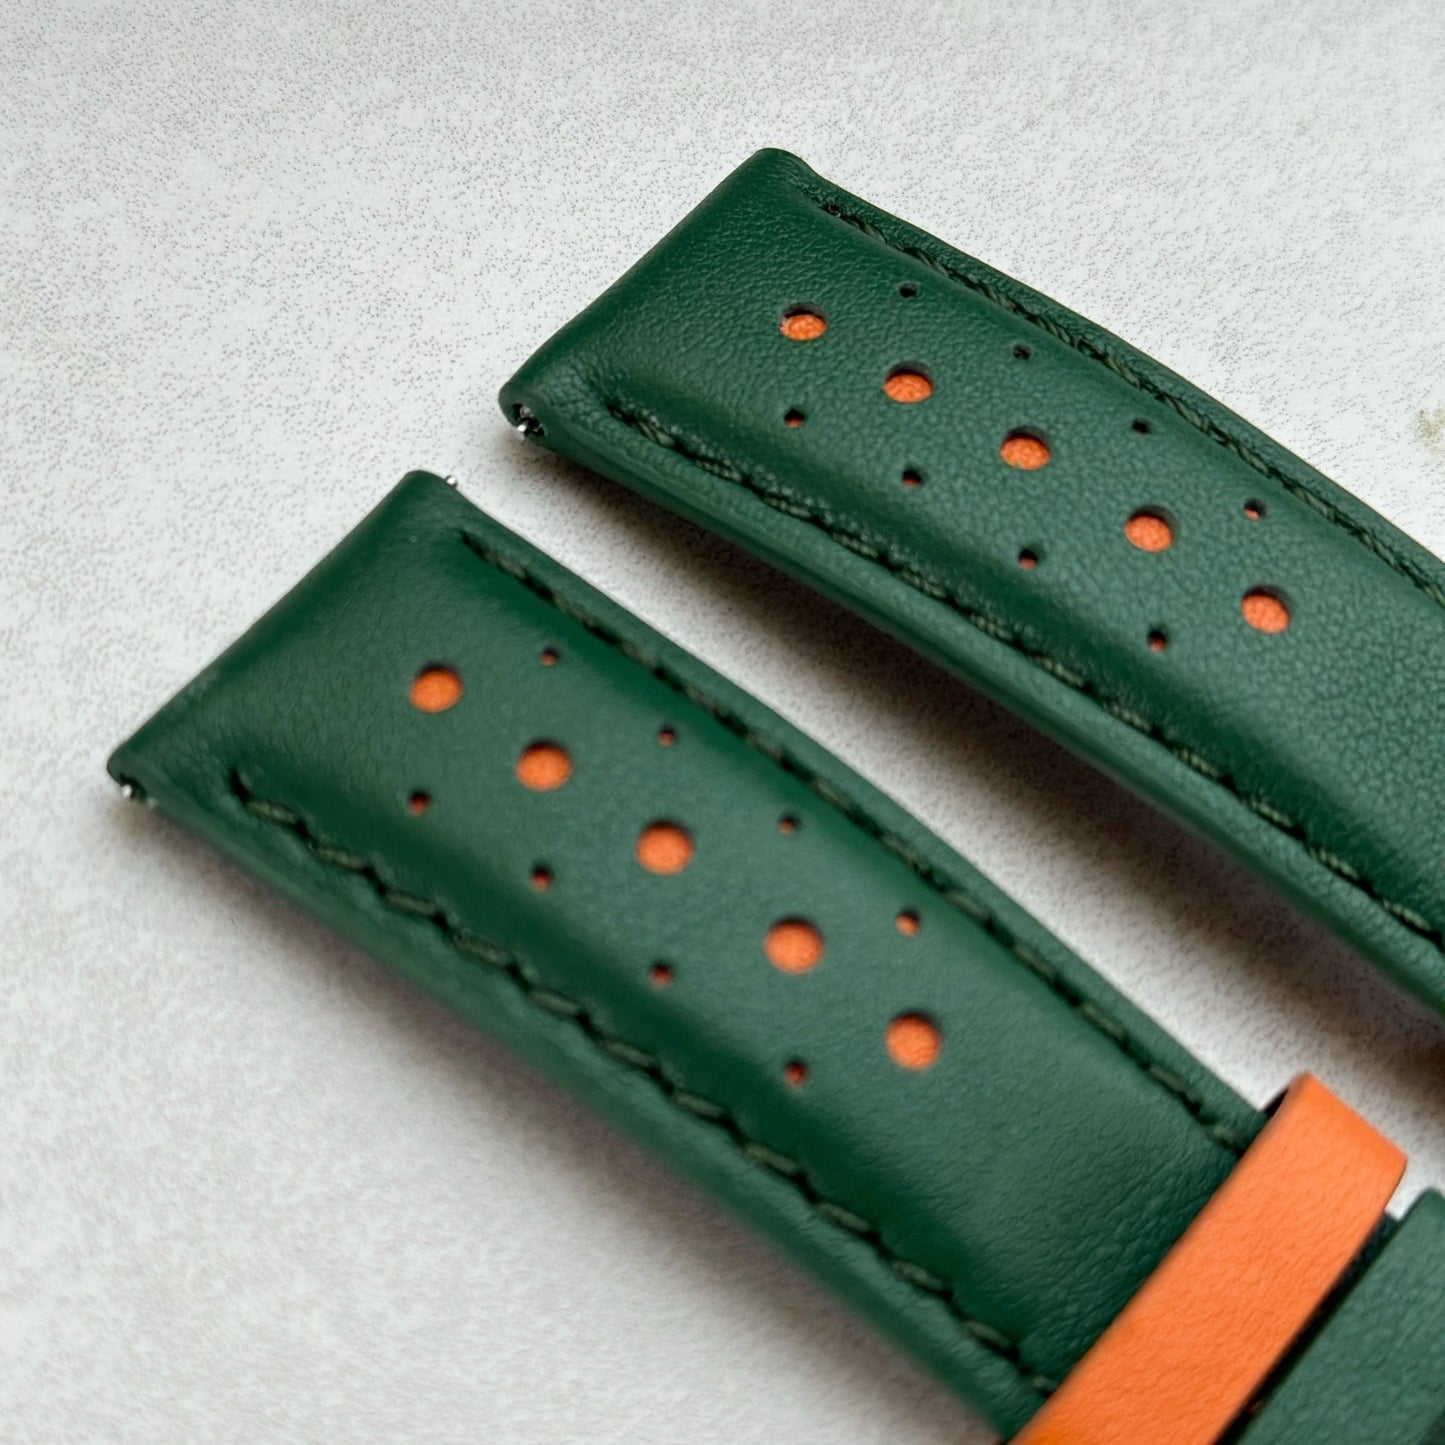 Le Mans green and orange full grain leather watch strap. Green leather with orange highlights. Padded leather strap.